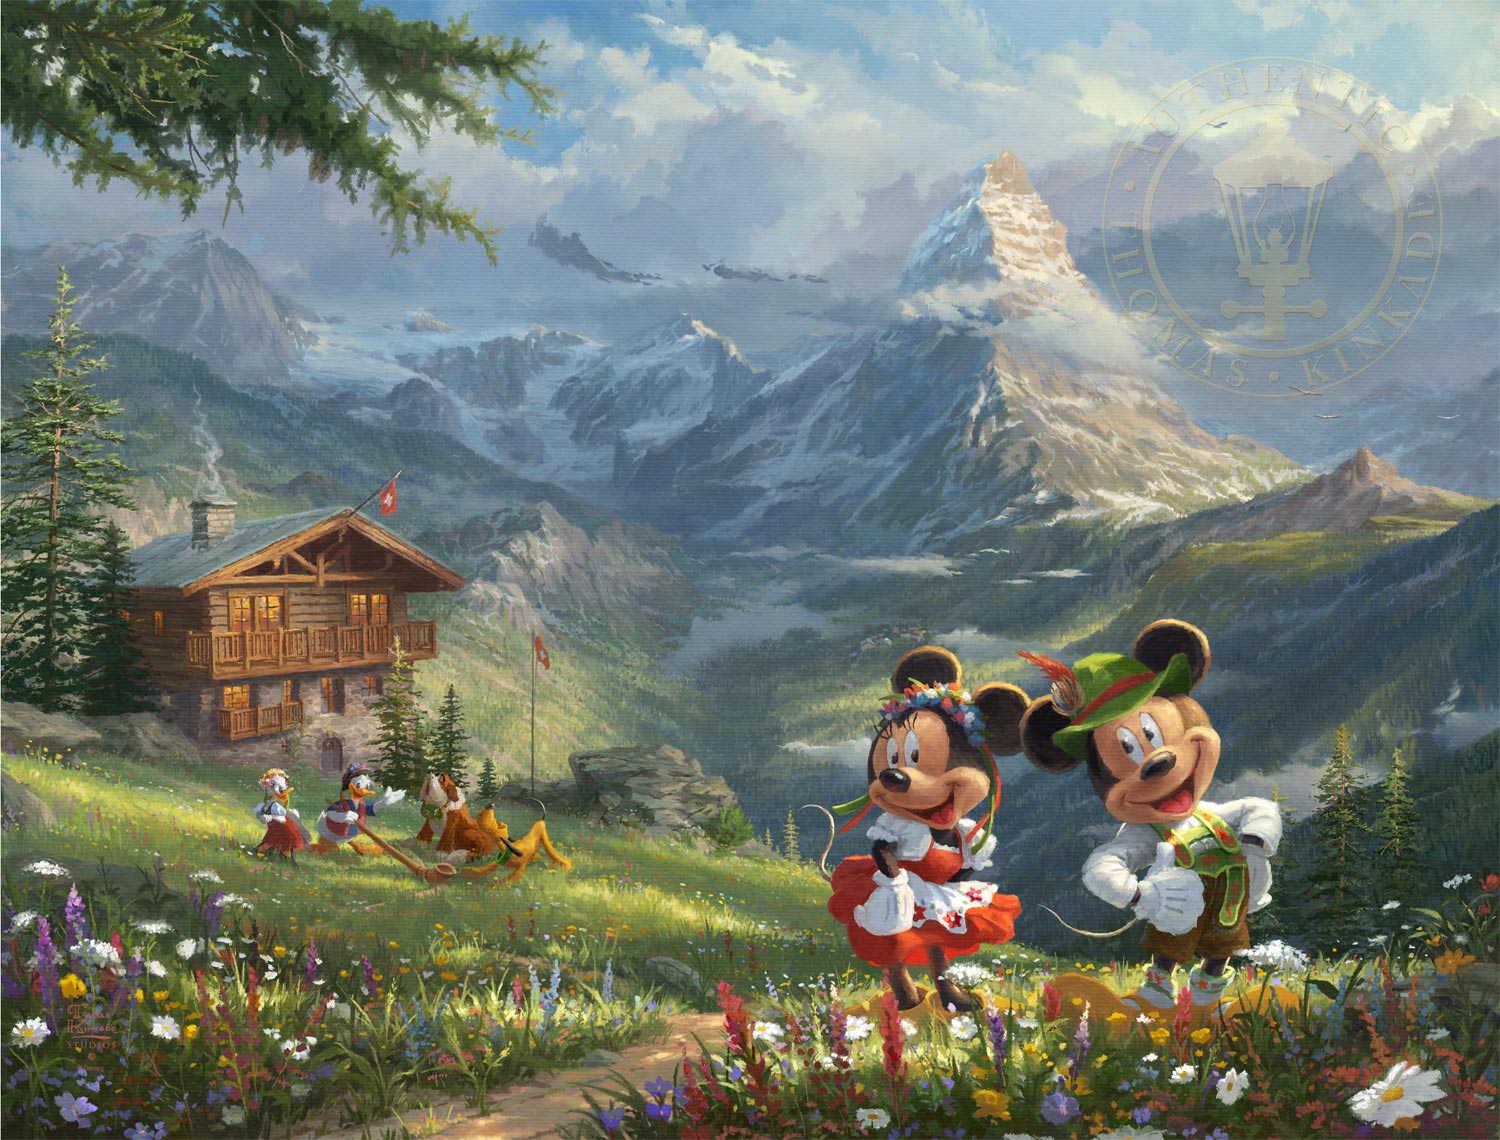 Passport to Adventure - Mickey and Minnie in the Alps